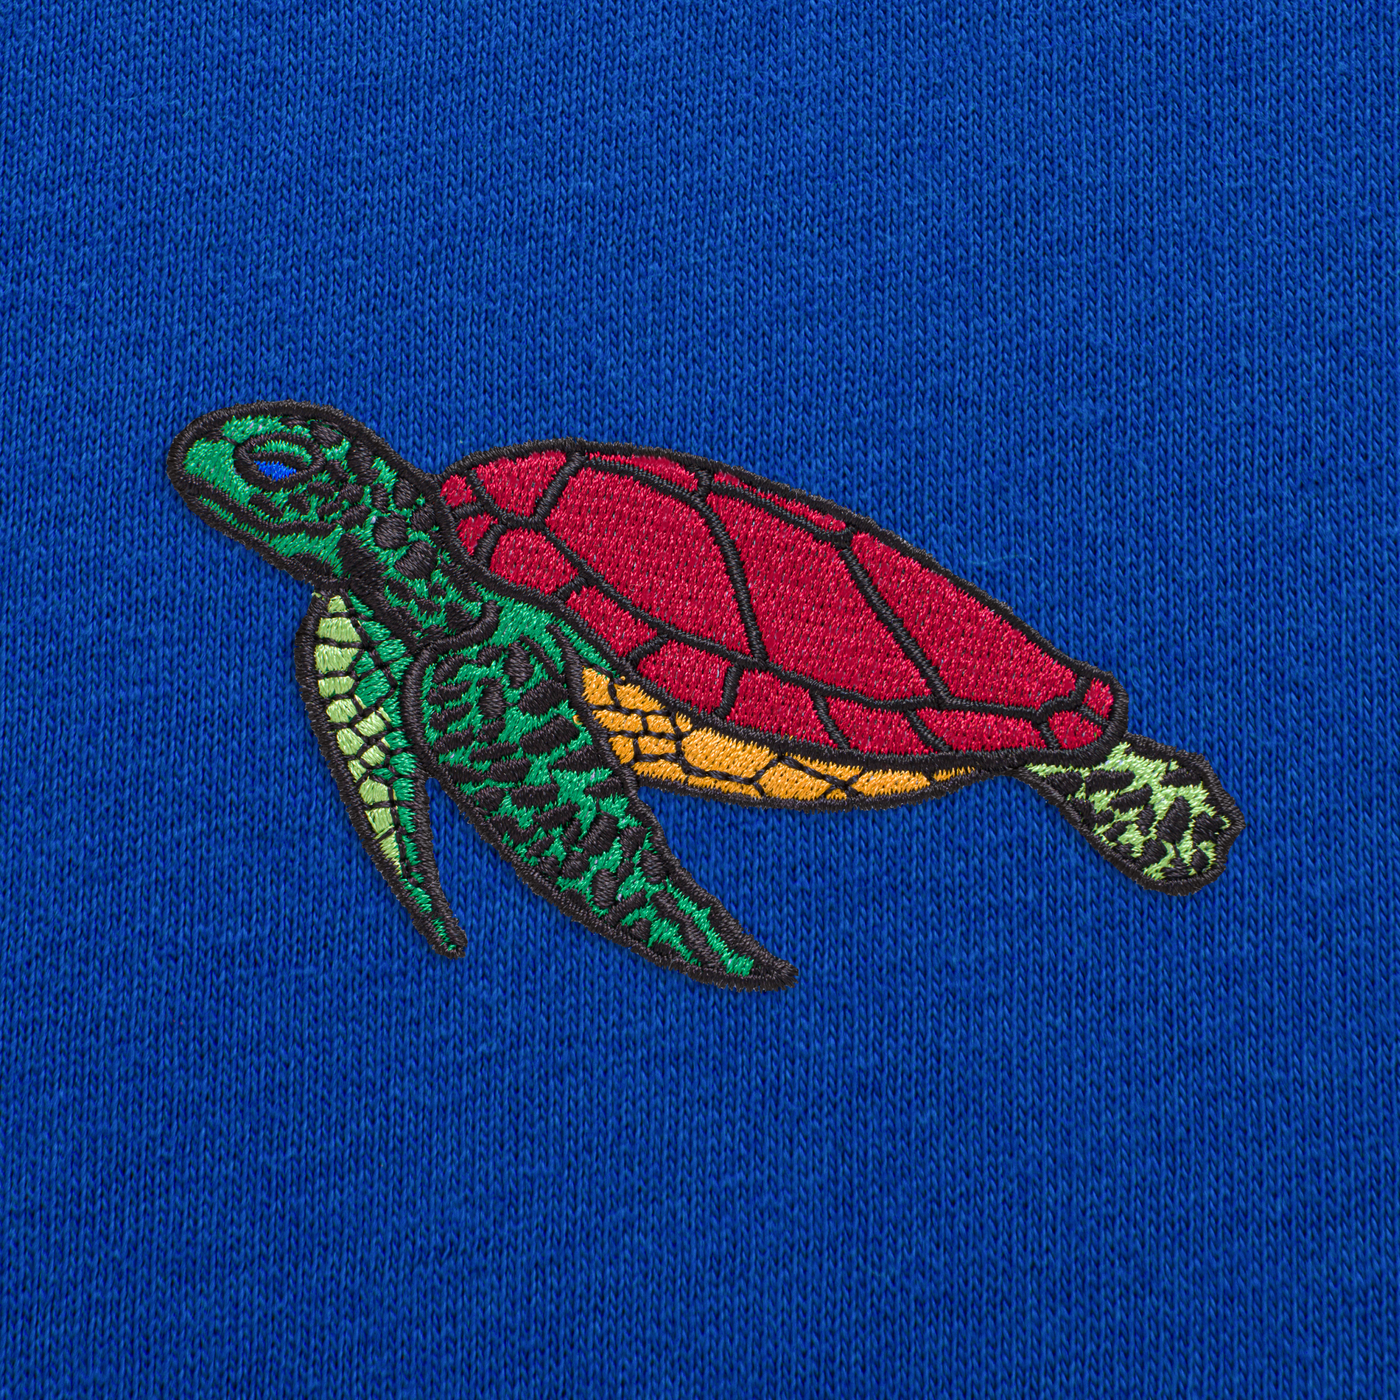 Bobby's Planet Kids Embroidered Sea Turtle T-Shirt from Seven Seas Fish Animals Collection in True Royal Color#color_true-royal